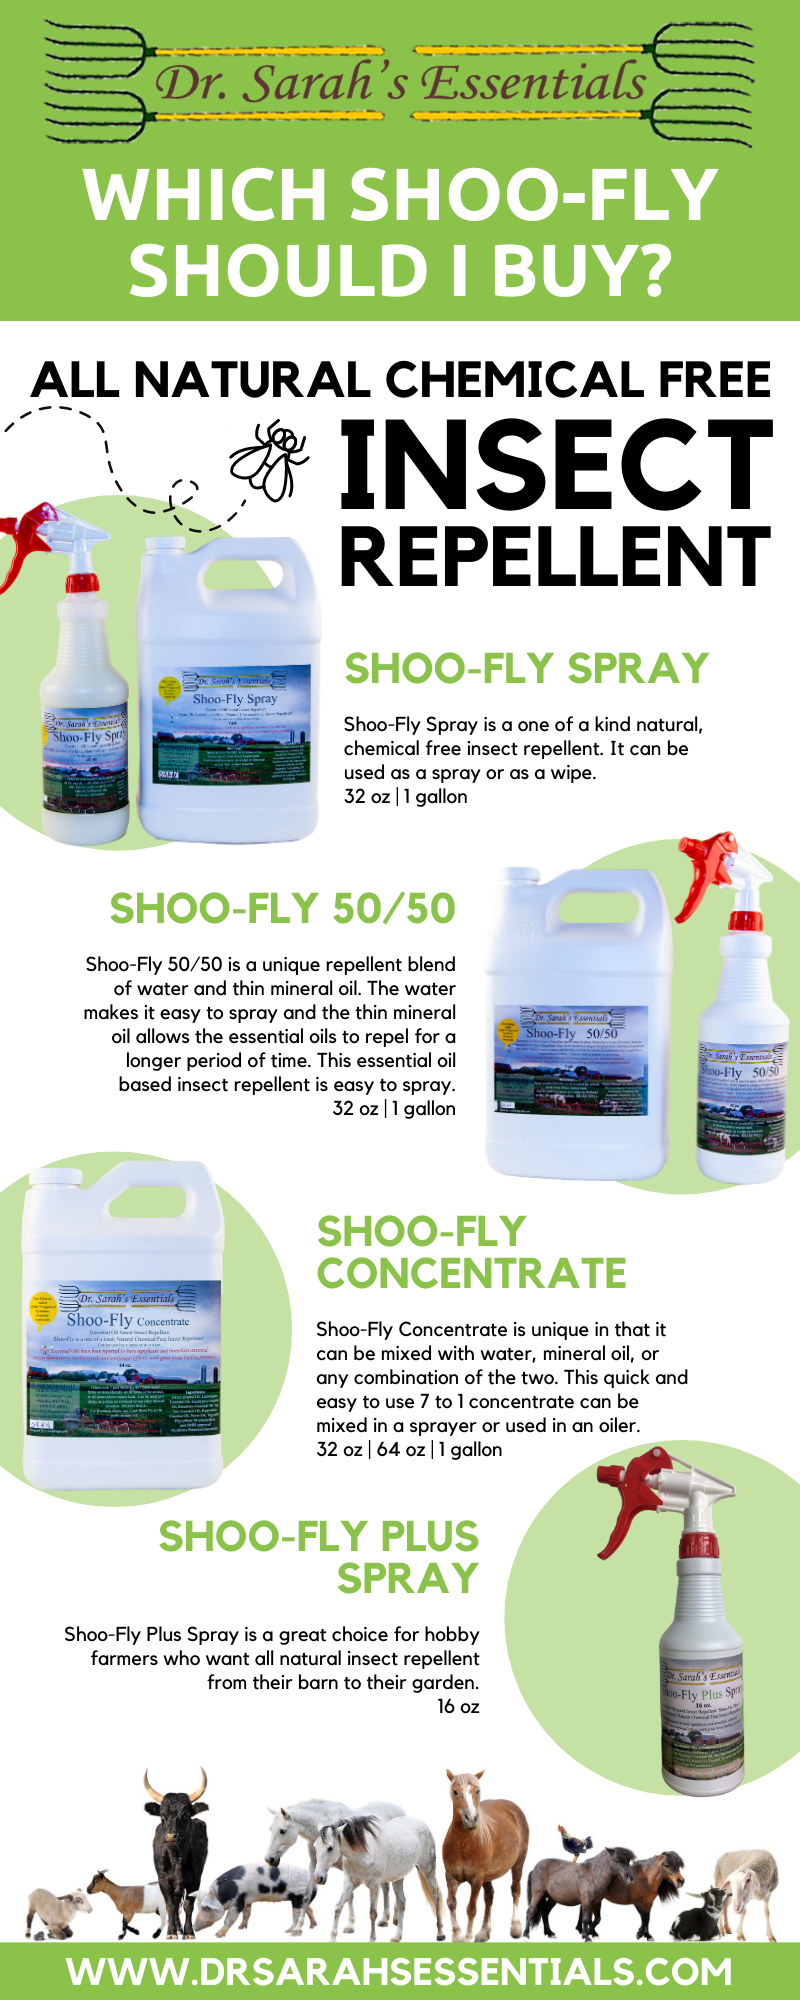 Shoo-Fly Insect Concentrate